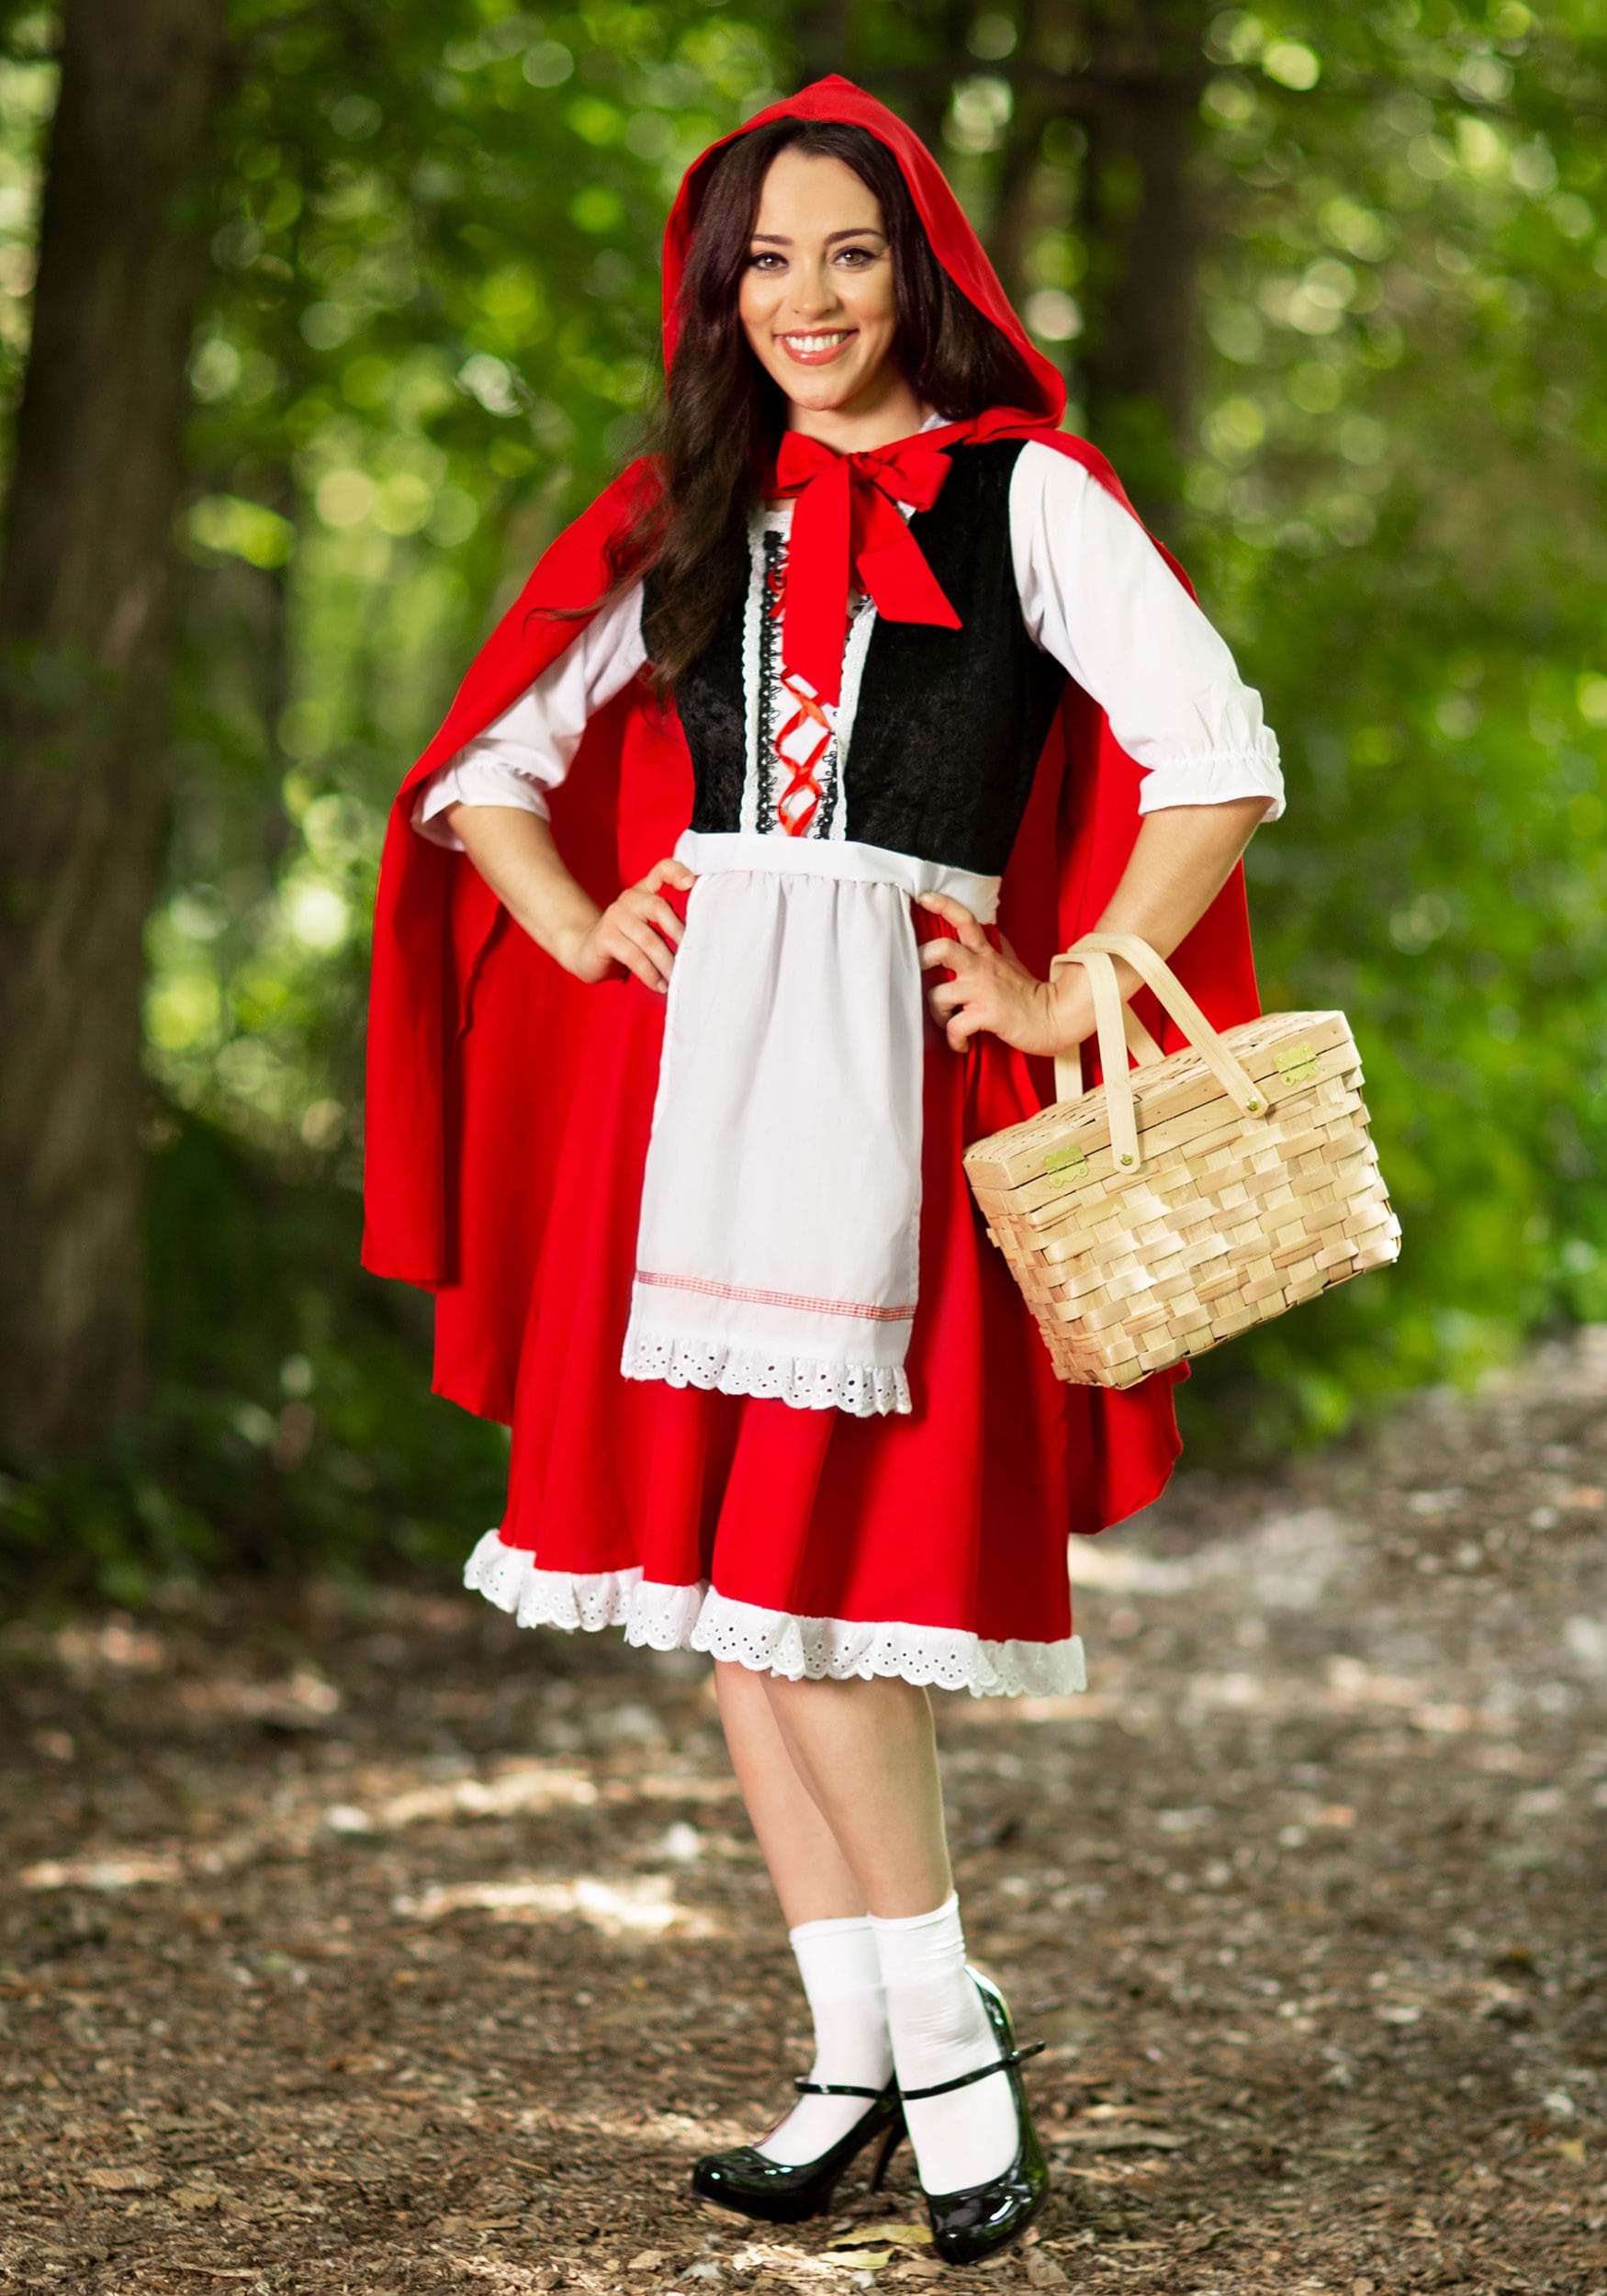 Lil red riding hood costume